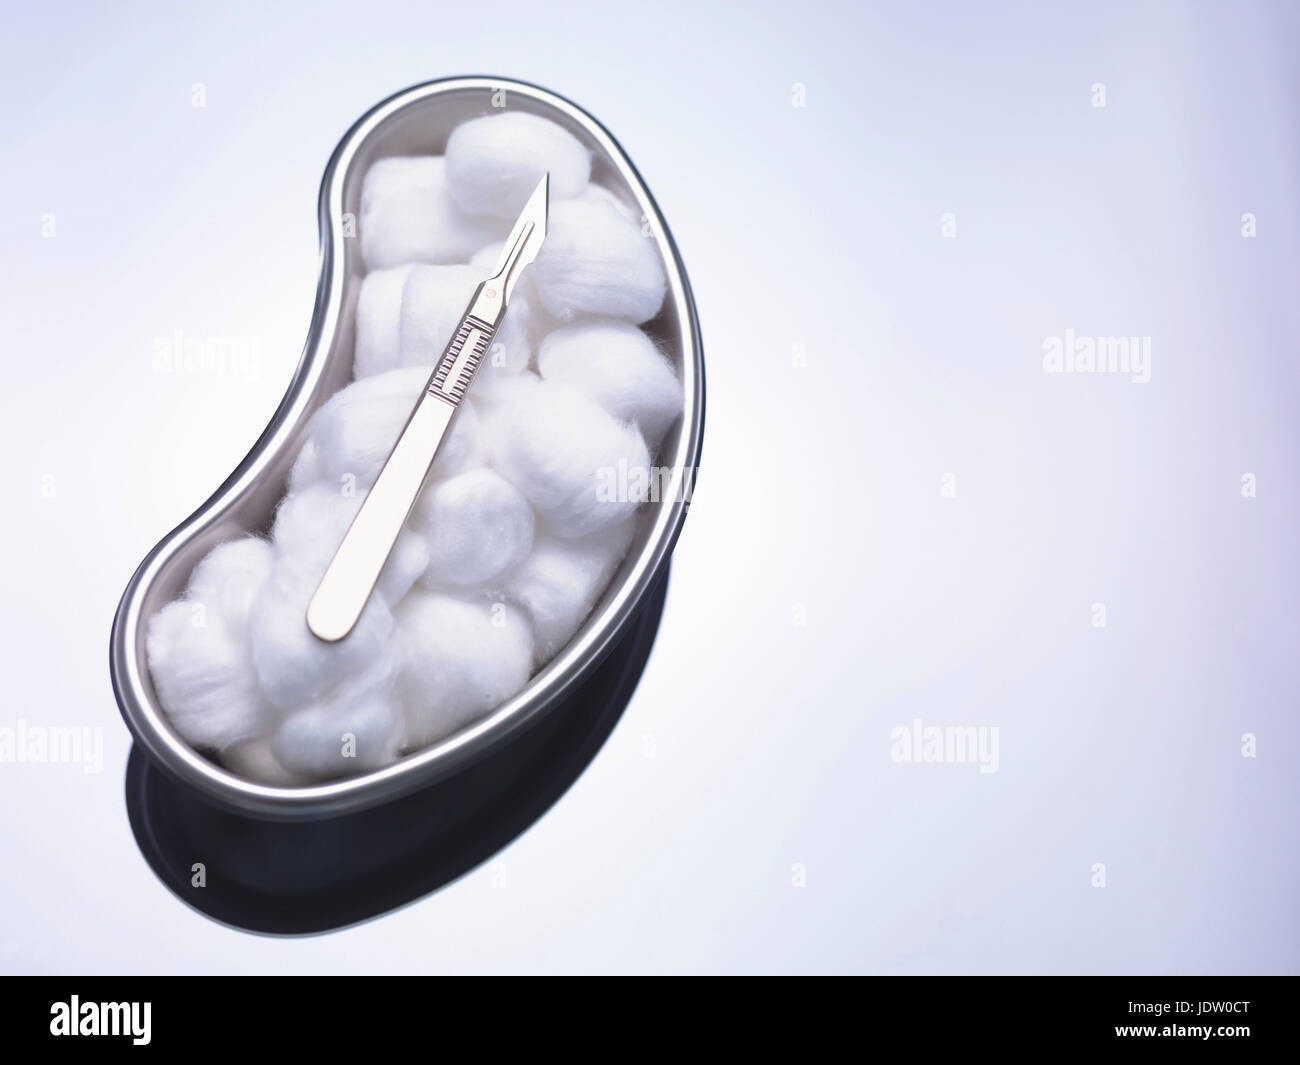 Cotton balls and scalpel in kidney bowl Stock Photo